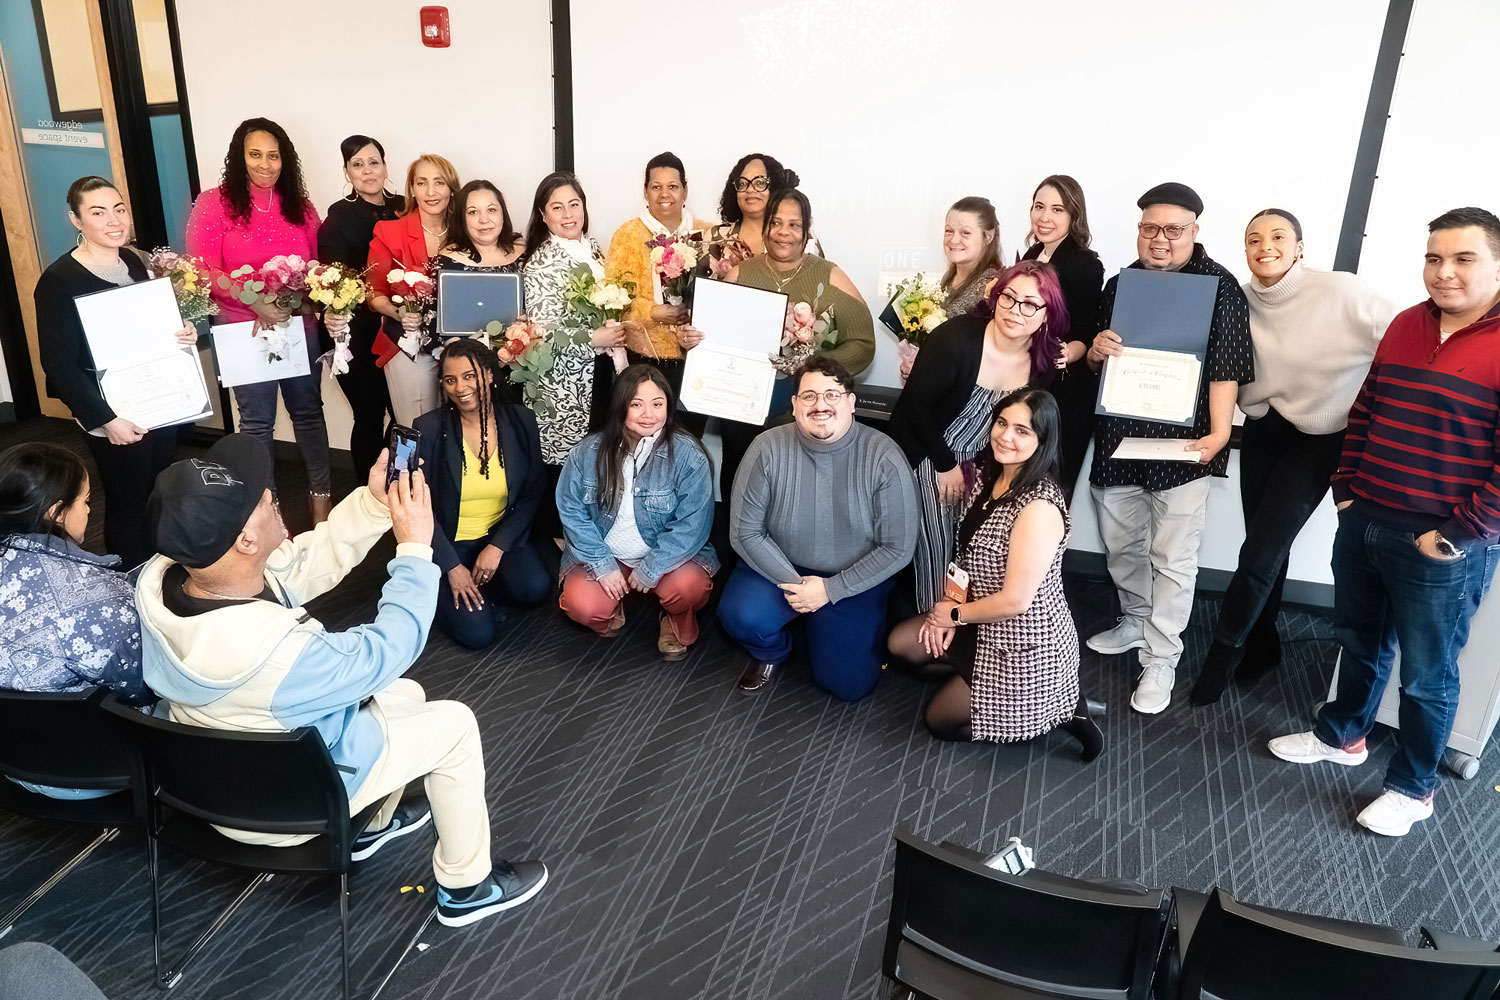 The first graduates of the pre-apprenticeship Mission Program pose for a picture at CIC in Providence after receiving their graduation certificates. Photo by Stephen Ide/ONE Neighborhood Builders.